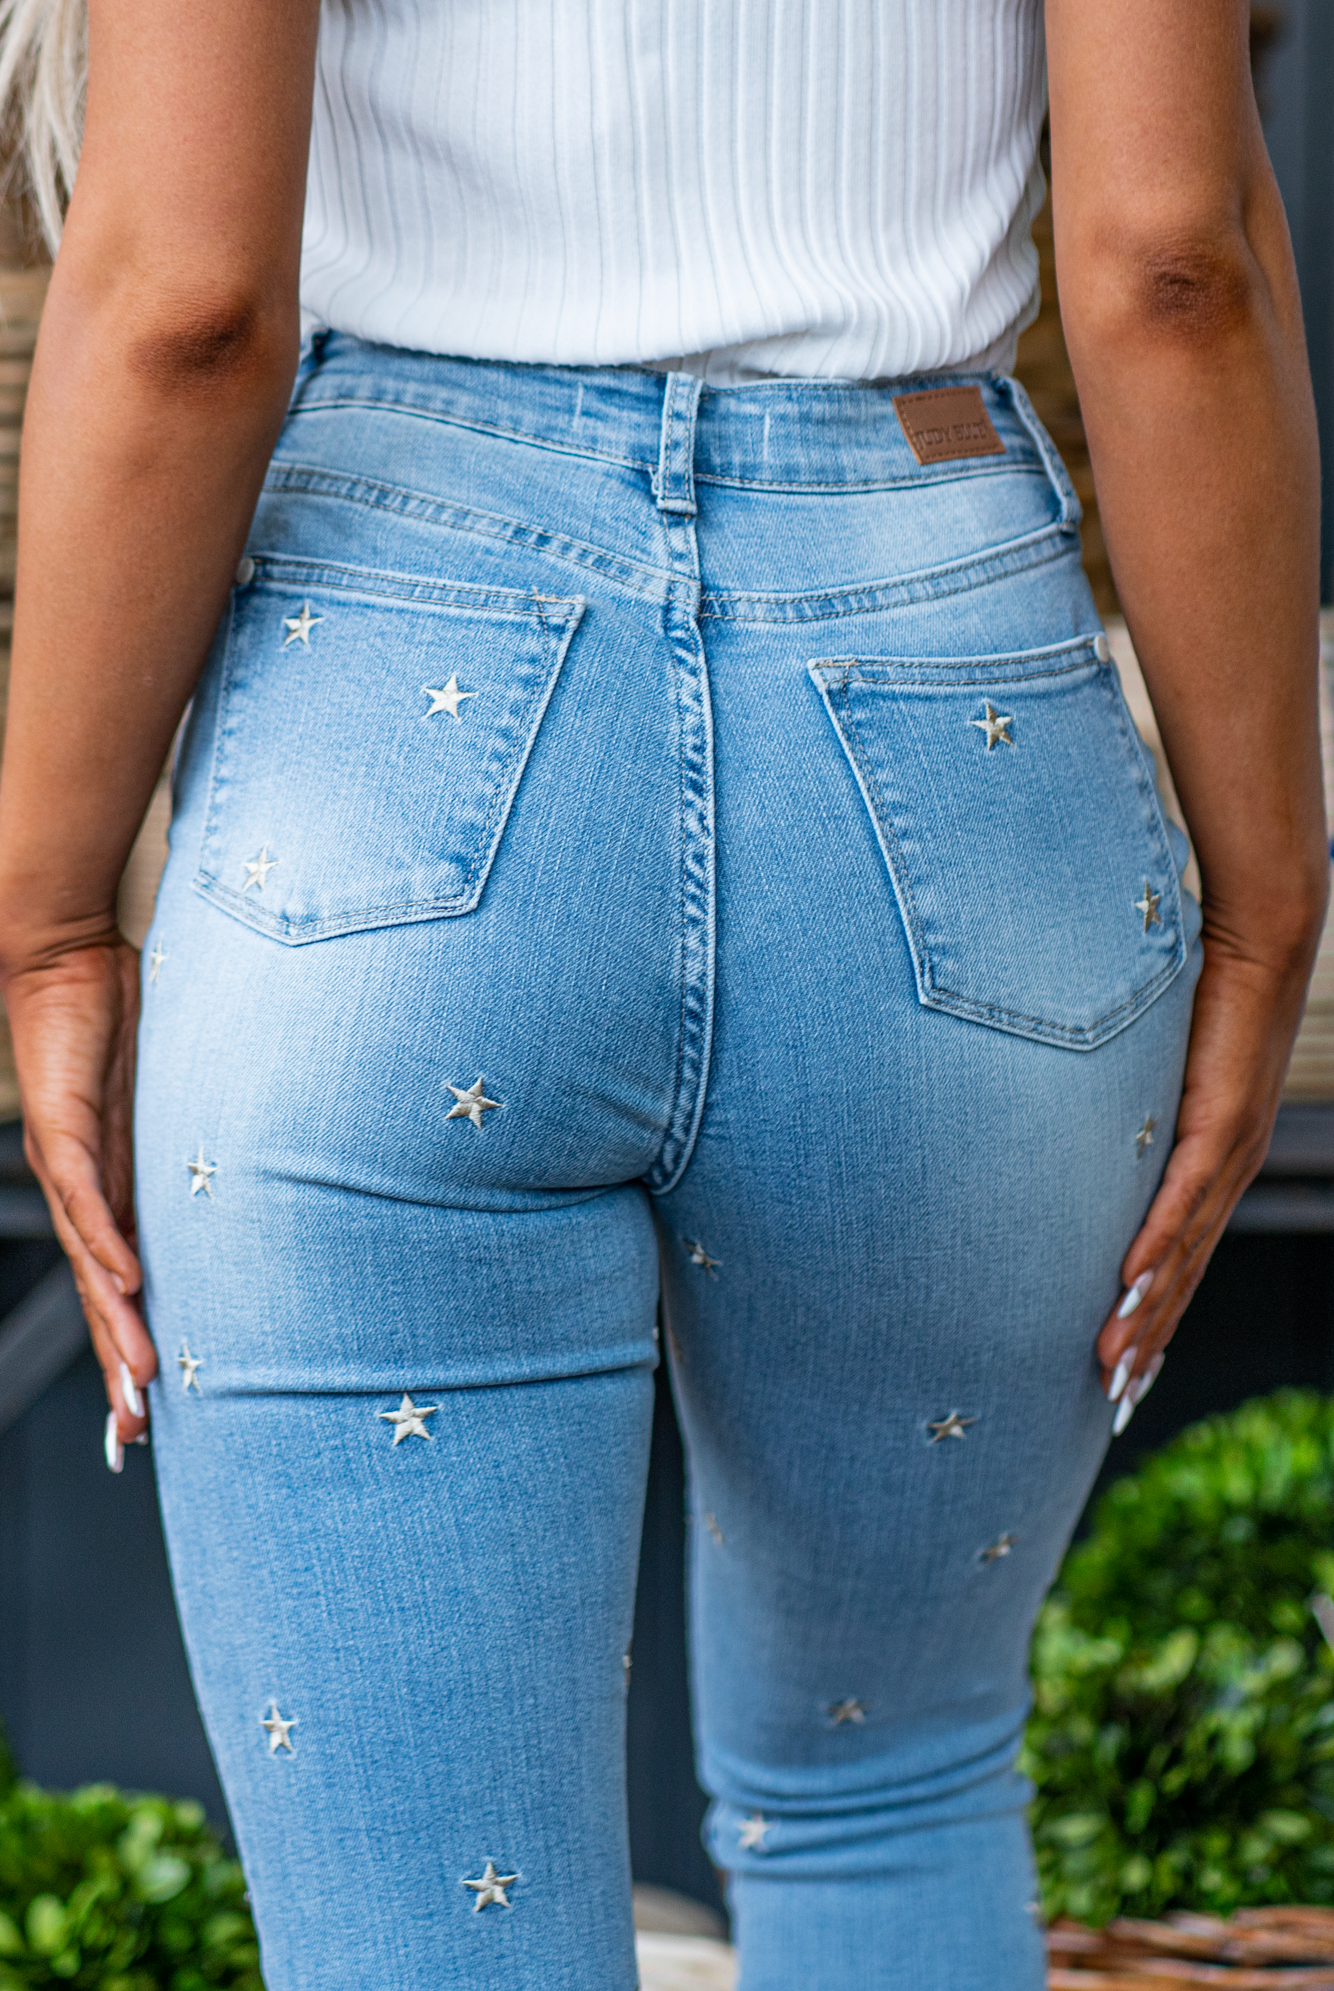 Judy Blue  Don't be afraid to wear high-waisted jeans, especially these star embroidered ones. With a dark blue wash, these will be new favorites!   Color: Light Blue Cut: Skinny, 28.5" Inseam* Rise: High Rise, 10.5" Front Rise* Machine Wash Separately In Cold Water Stitching: Classic Material:  92% COTTON,7% POLYESTER,1% SPANDEX Fly: Zipper Style #: JB88265  , 88265 Contact us for any additional measurements or sizing.    *Measured on the smallest size, measurements may vary by size. 